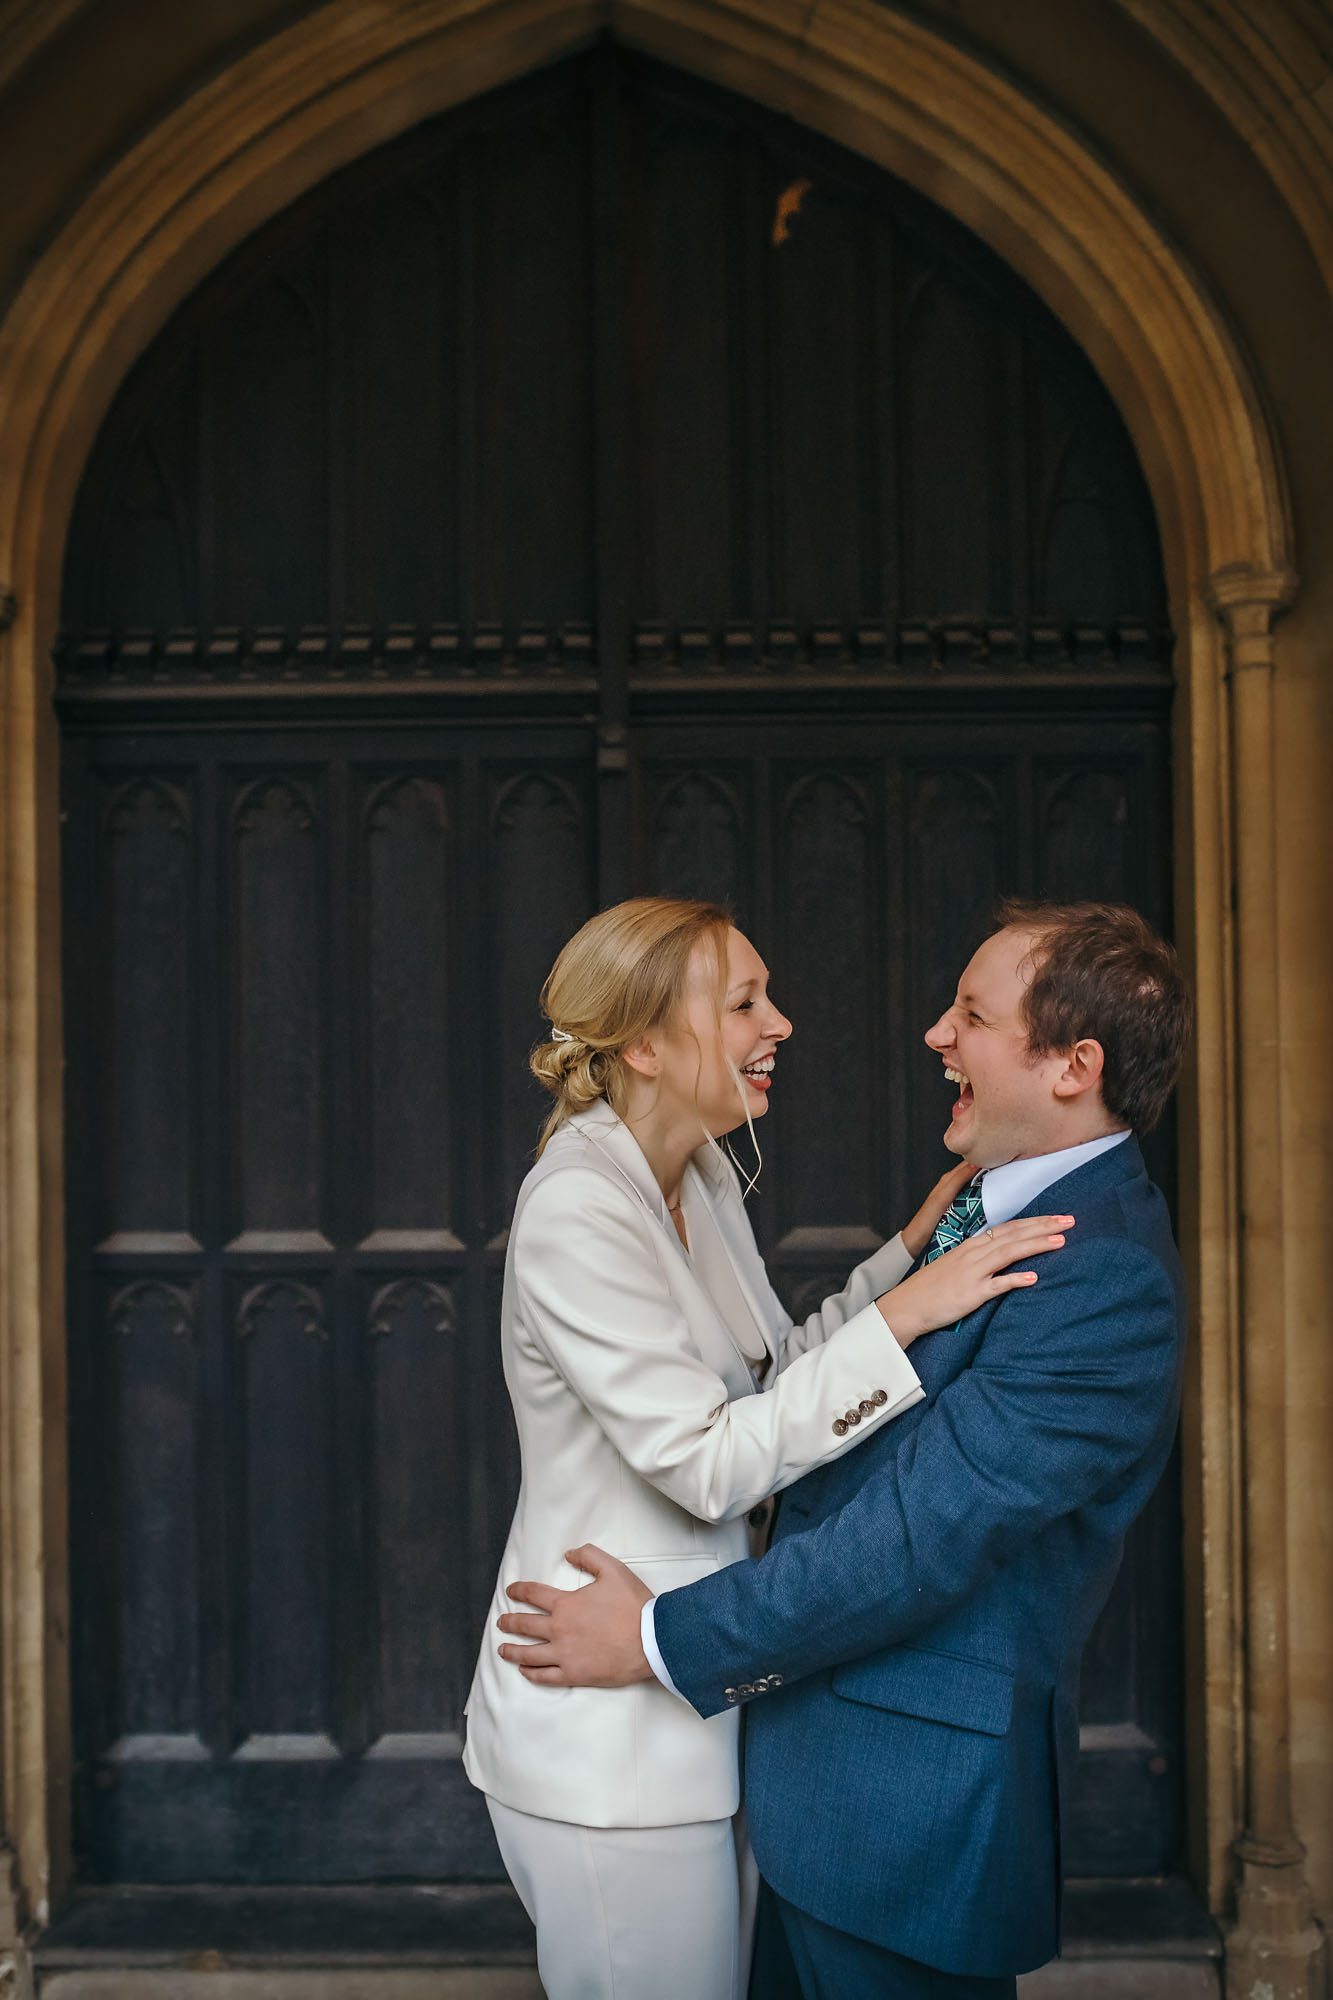 Newly-weds laughing in front of large door to St Luke's Church, Chelsea